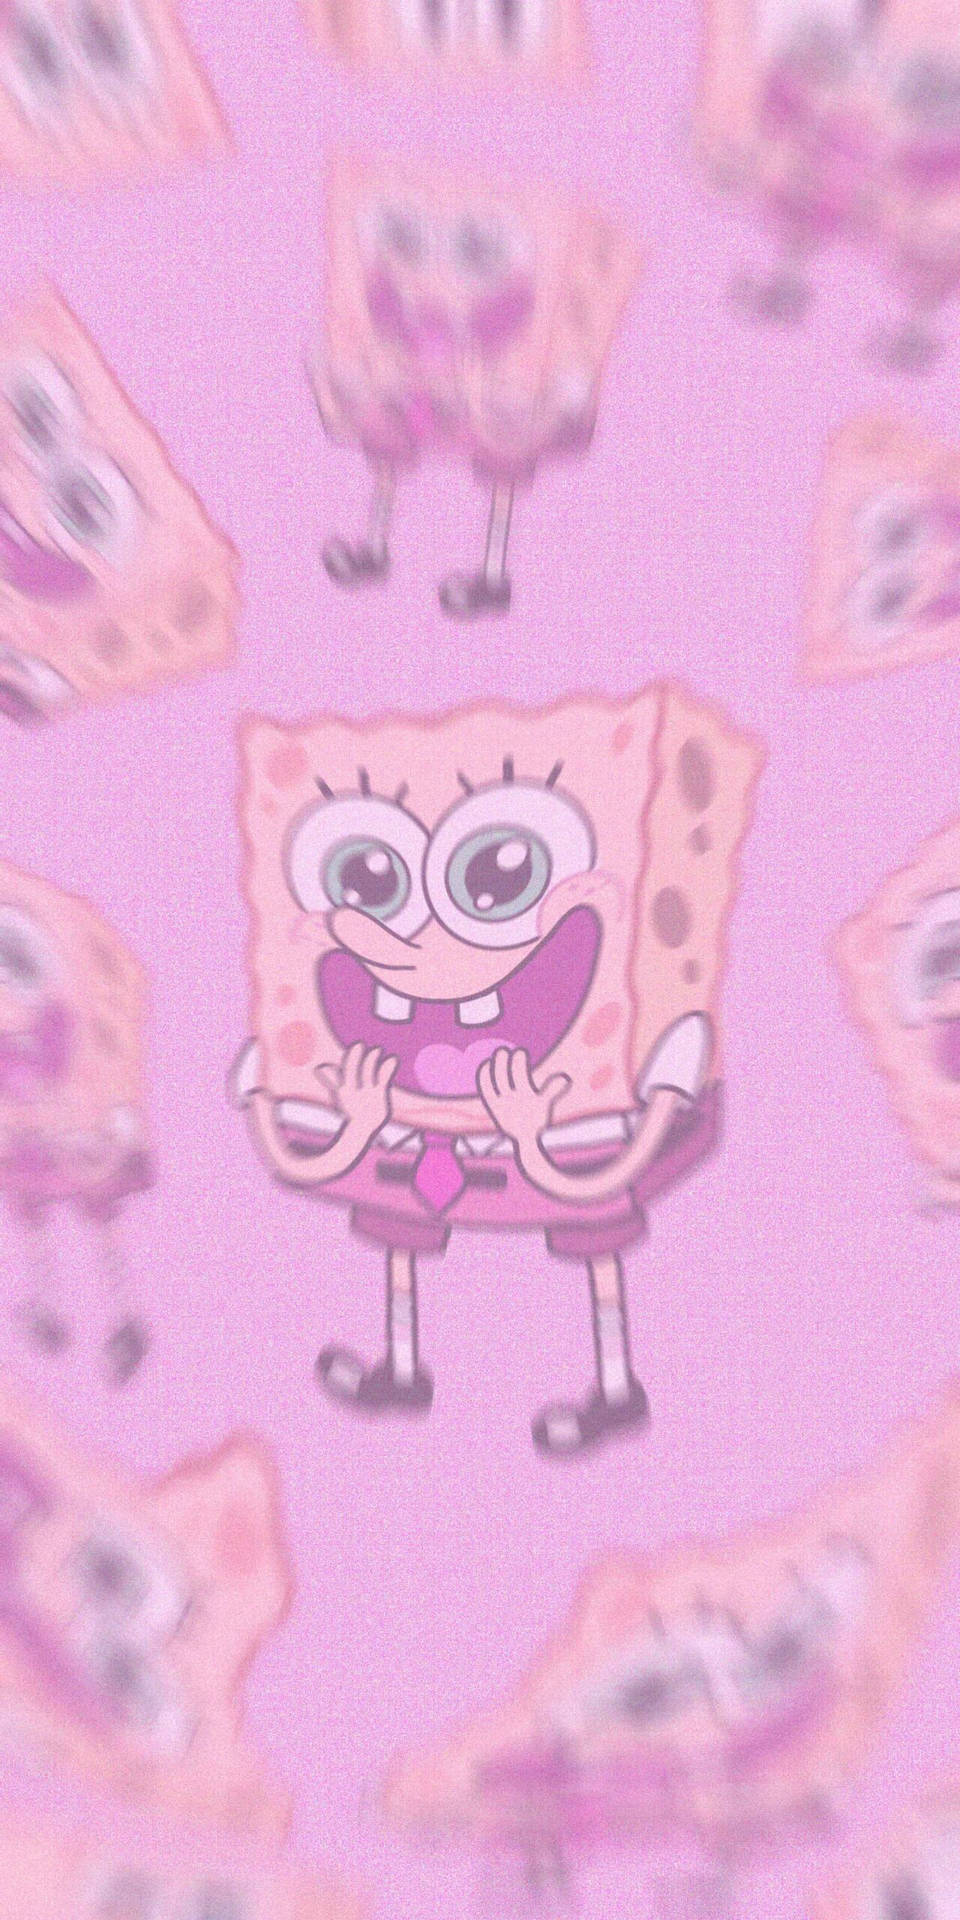 Delighted Spongebob On Cute And Pink Backdrop Background